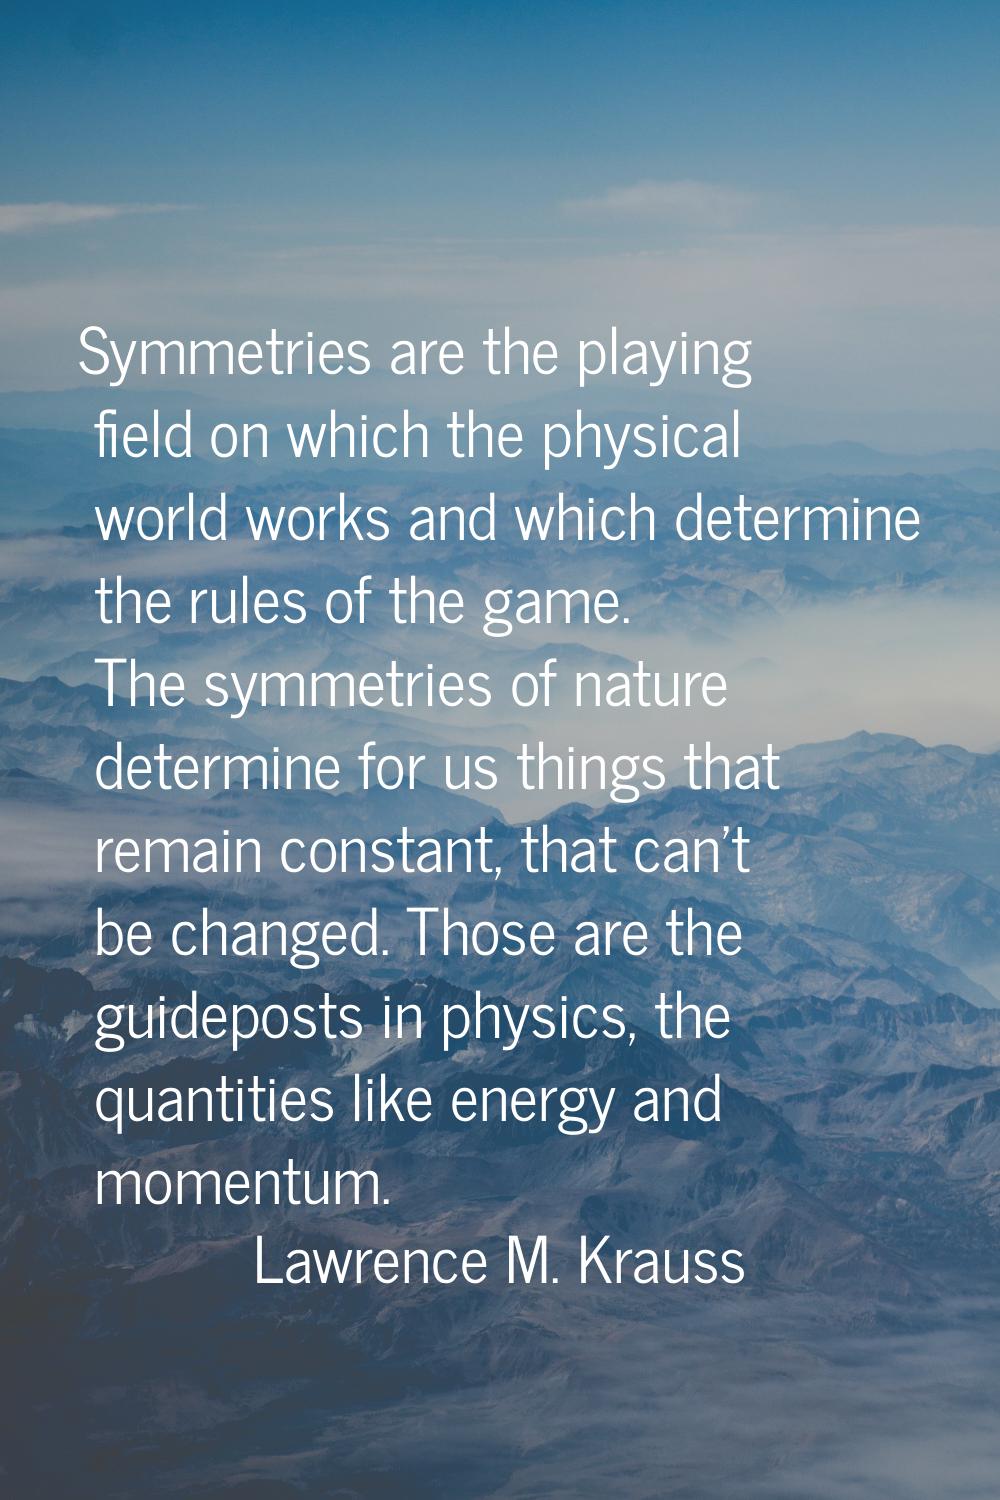 Symmetries are the playing field on which the physical world works and which determine the rules of